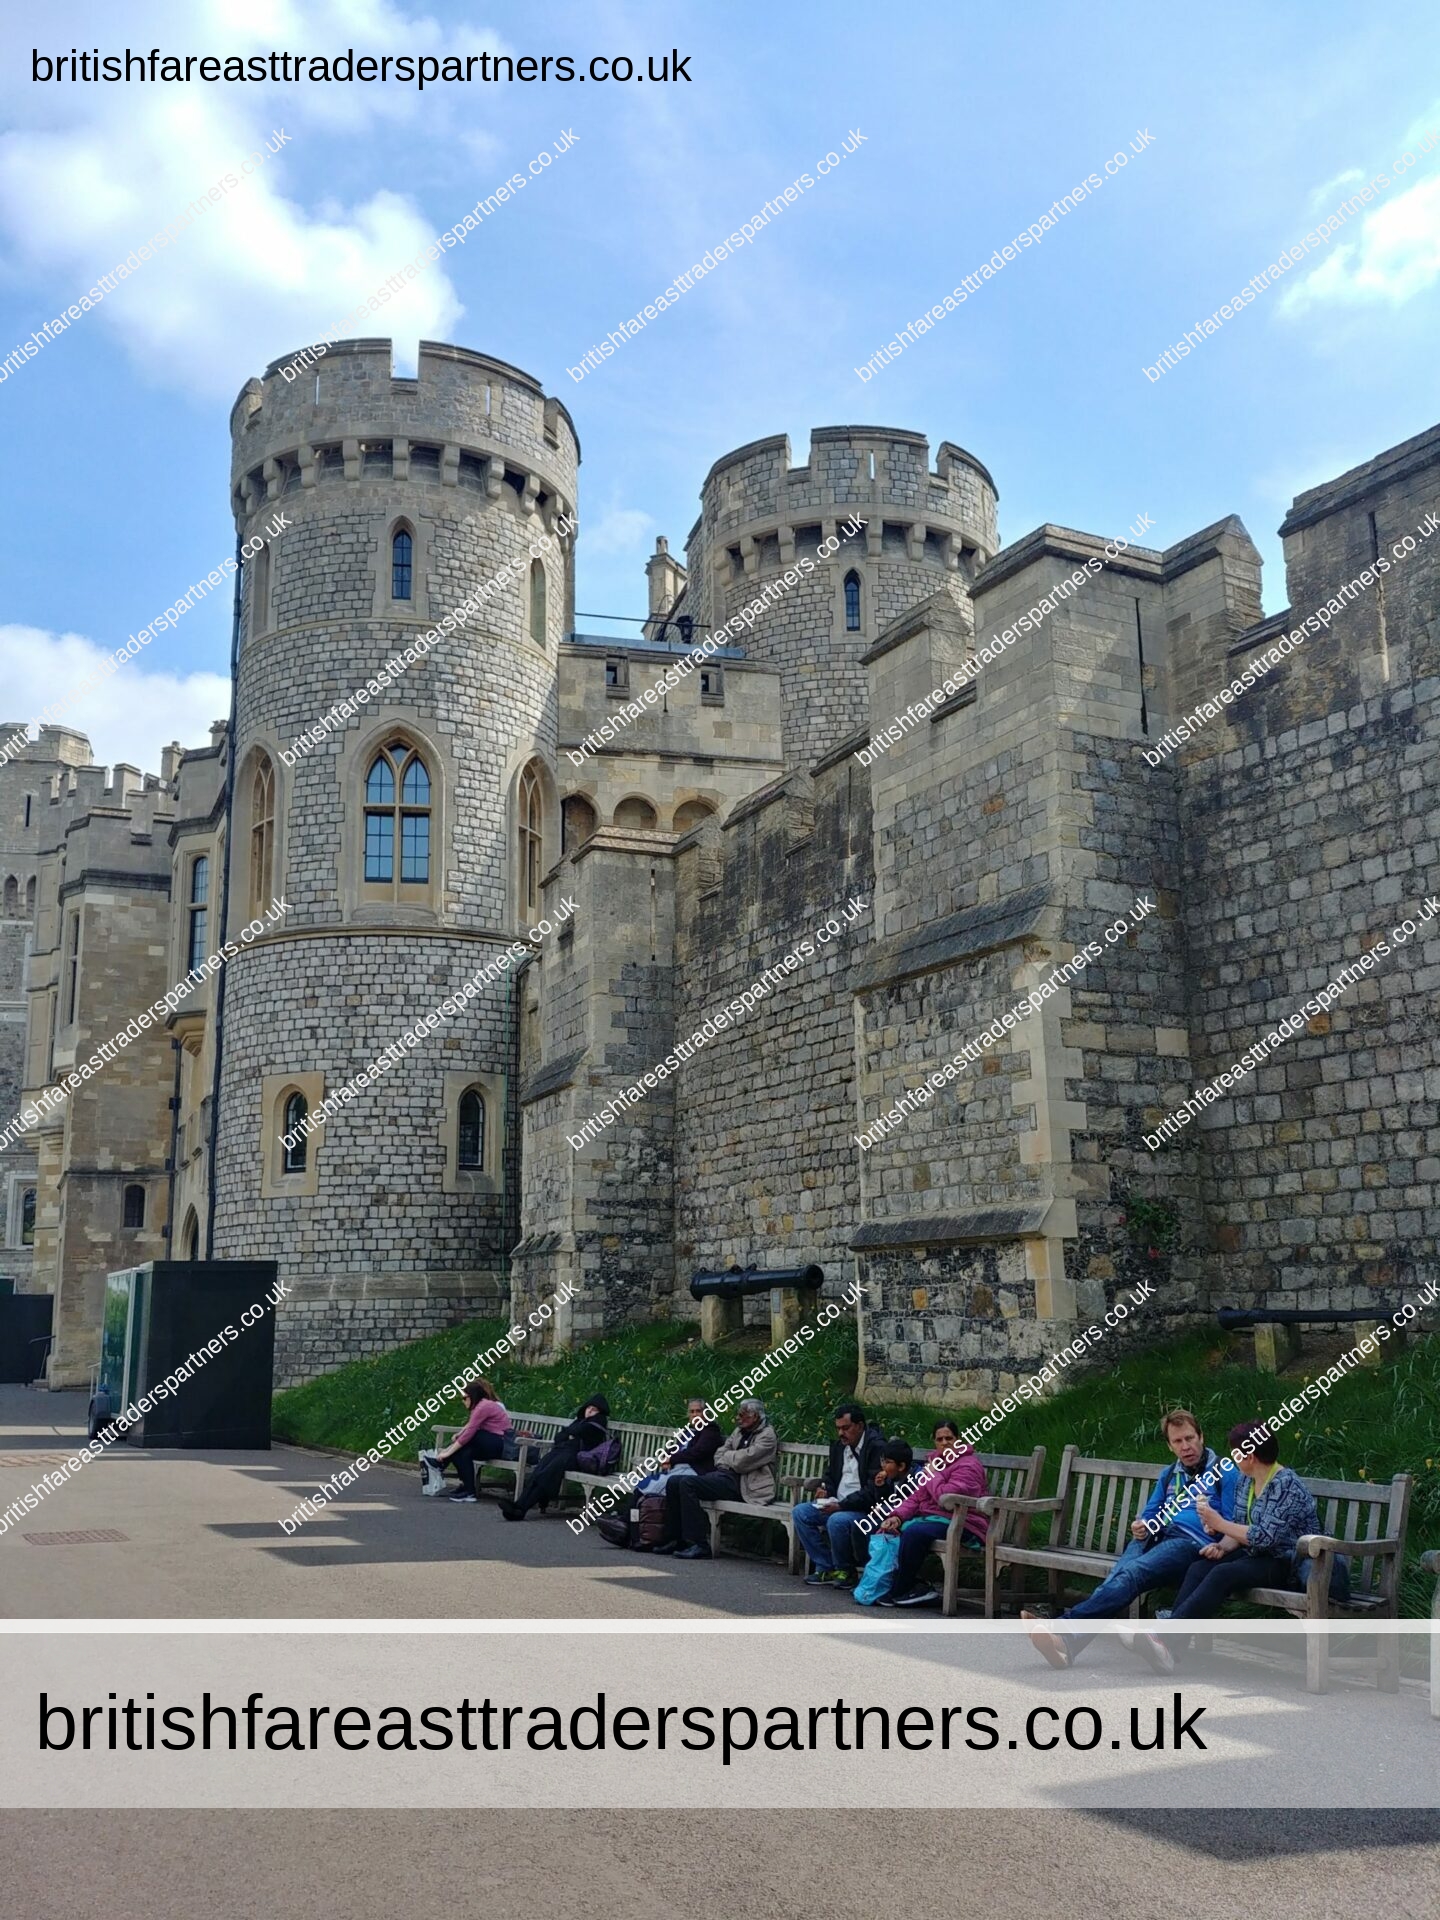 MUST SEE PLACES OF HISTORICAL INTEREST : DAYS OUT IN ENGLAND: WINDSOR CASTLE & ETON, ENGLAND, UNITED KINGDOM TRAVEL | HERITAGE | HISTORY | ROYALTY | CASTLES